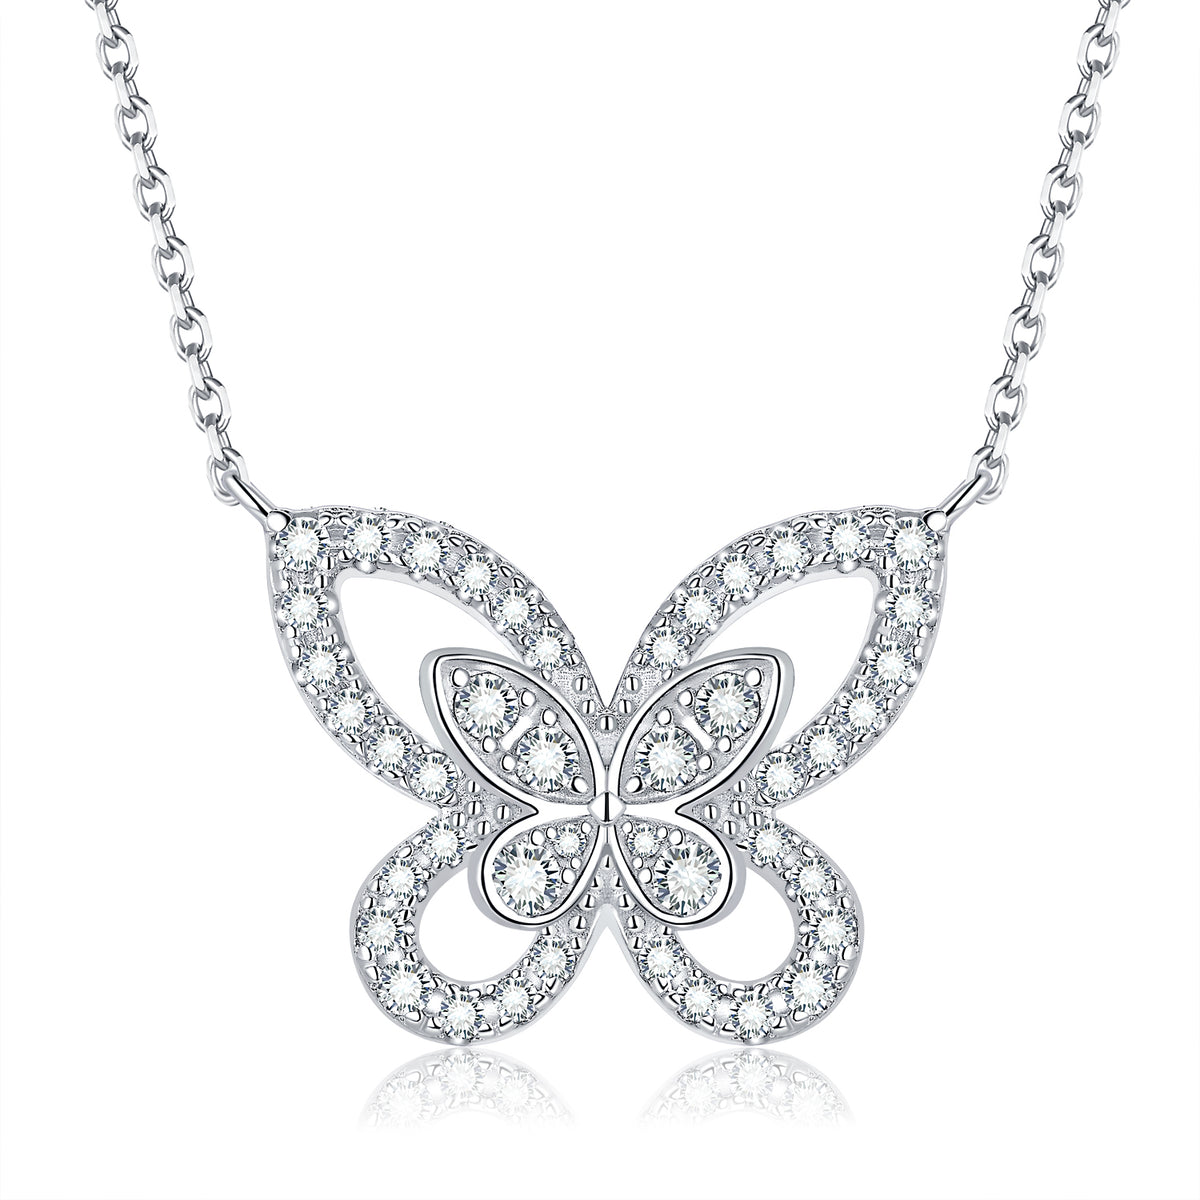 S925 Silver Moissanite Diamond Butterfly Necklaces PM5032O